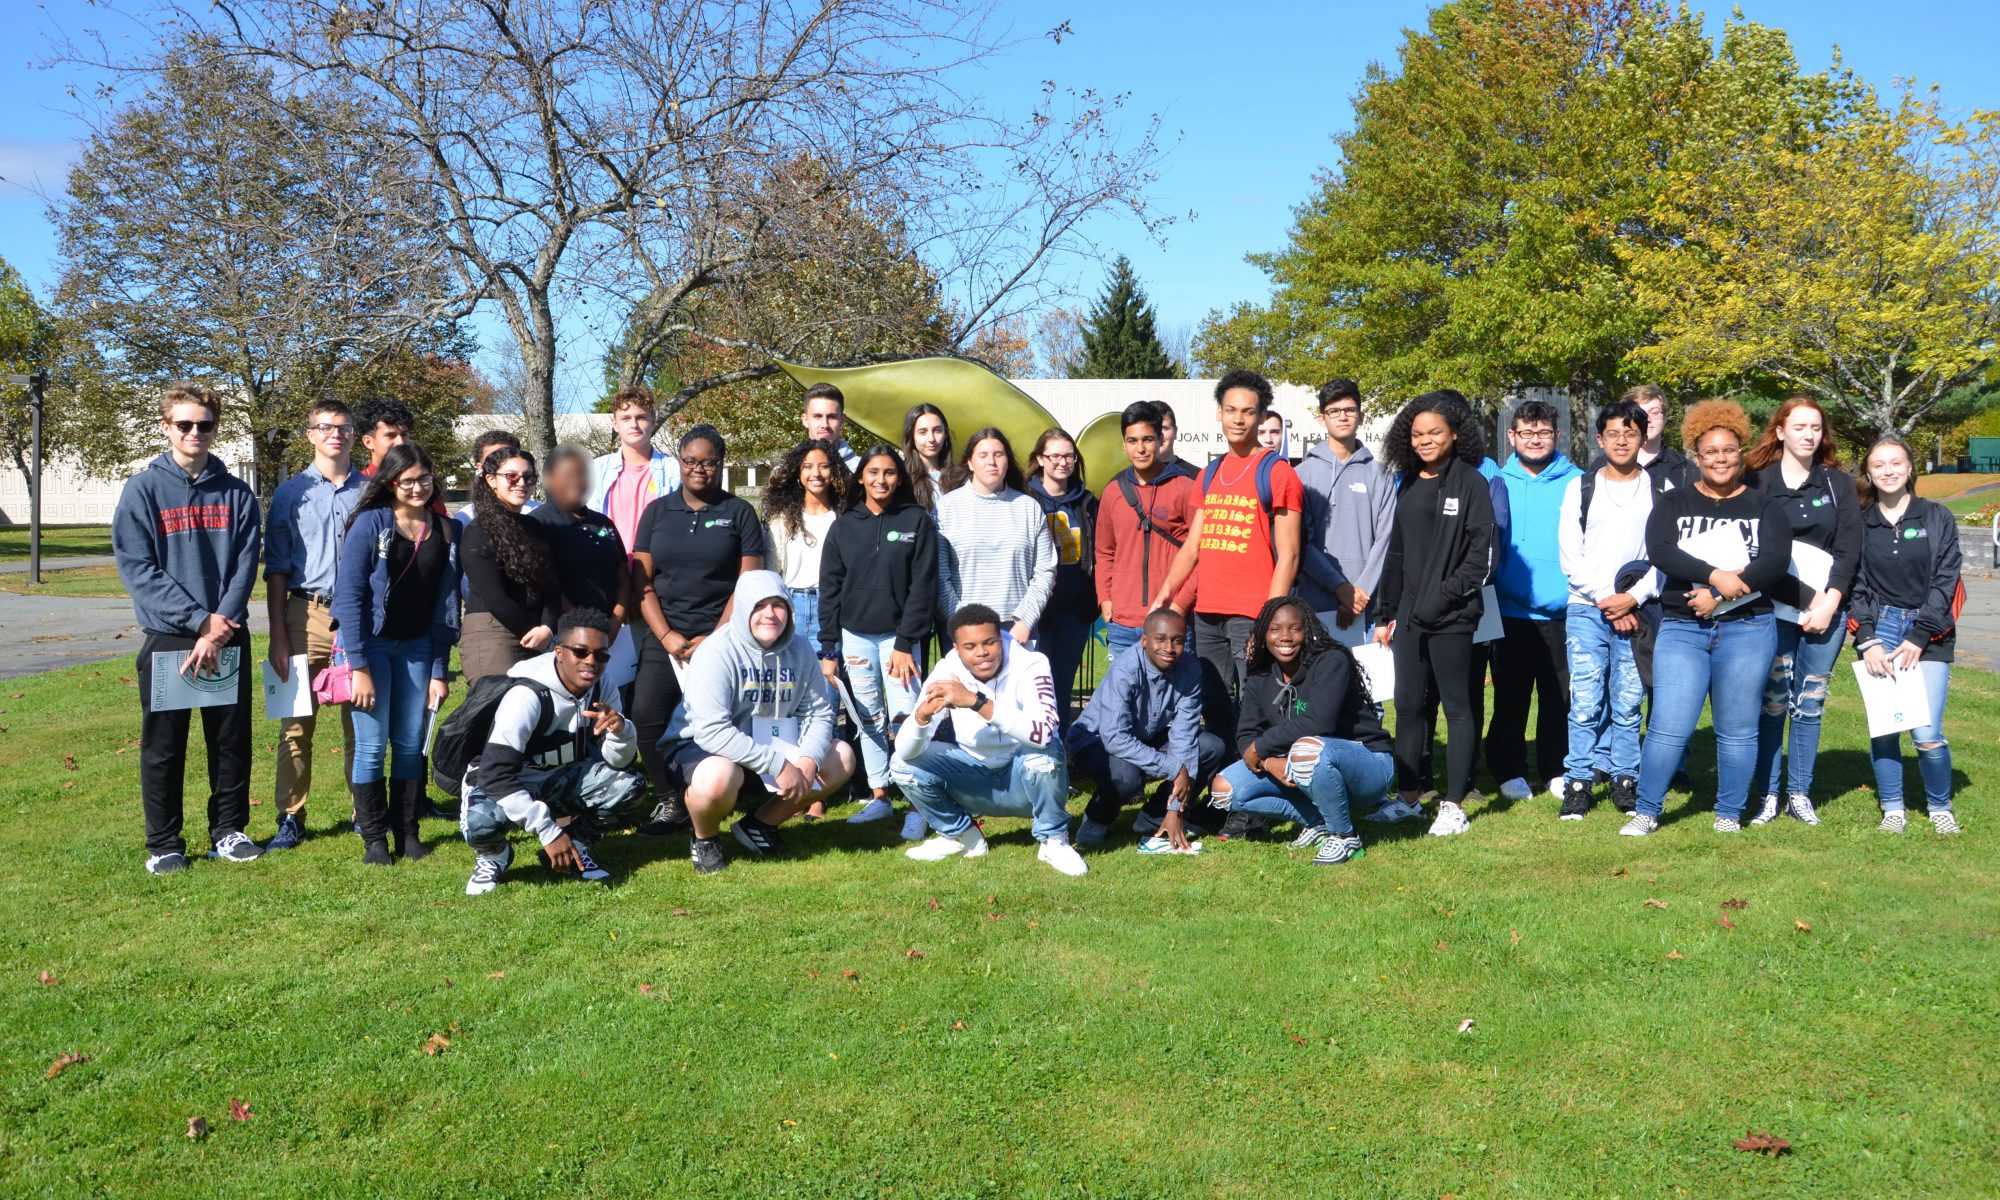 Blue sky, green grass and trees. A large group of students stand and sit for the photo.